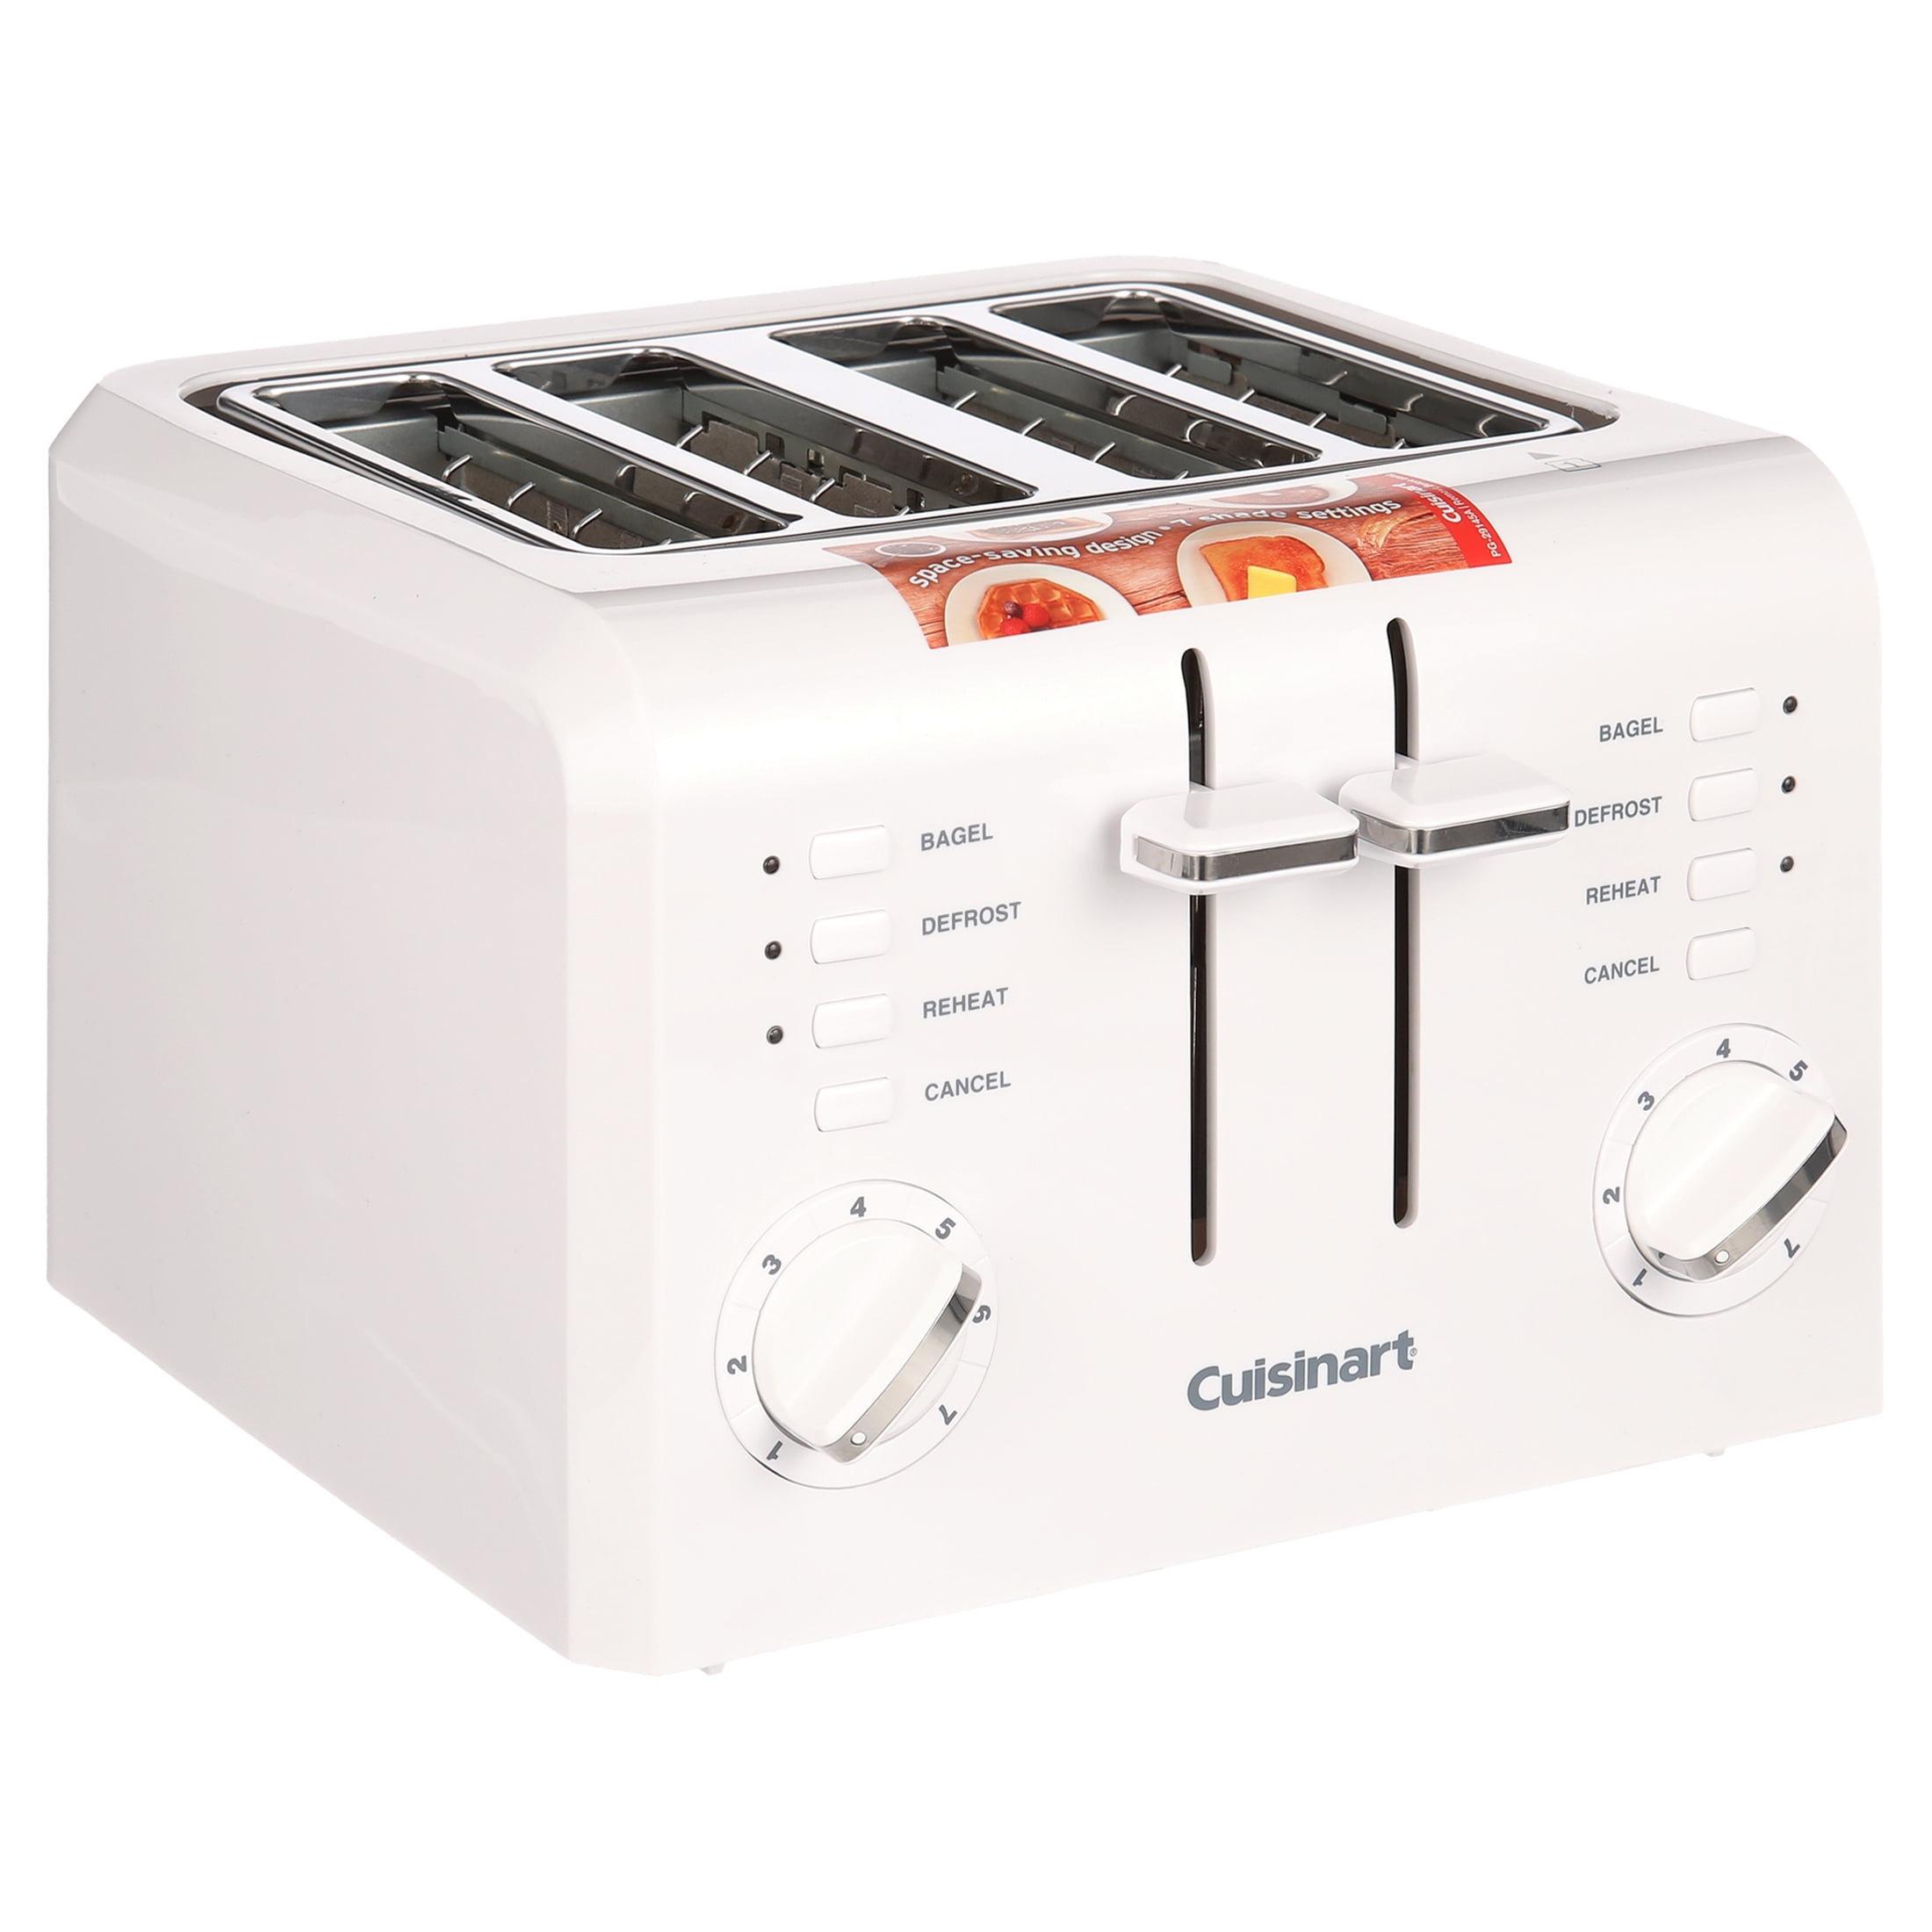 Cuisinart Classic Series 4 Slice Compact Toaster & Reviews